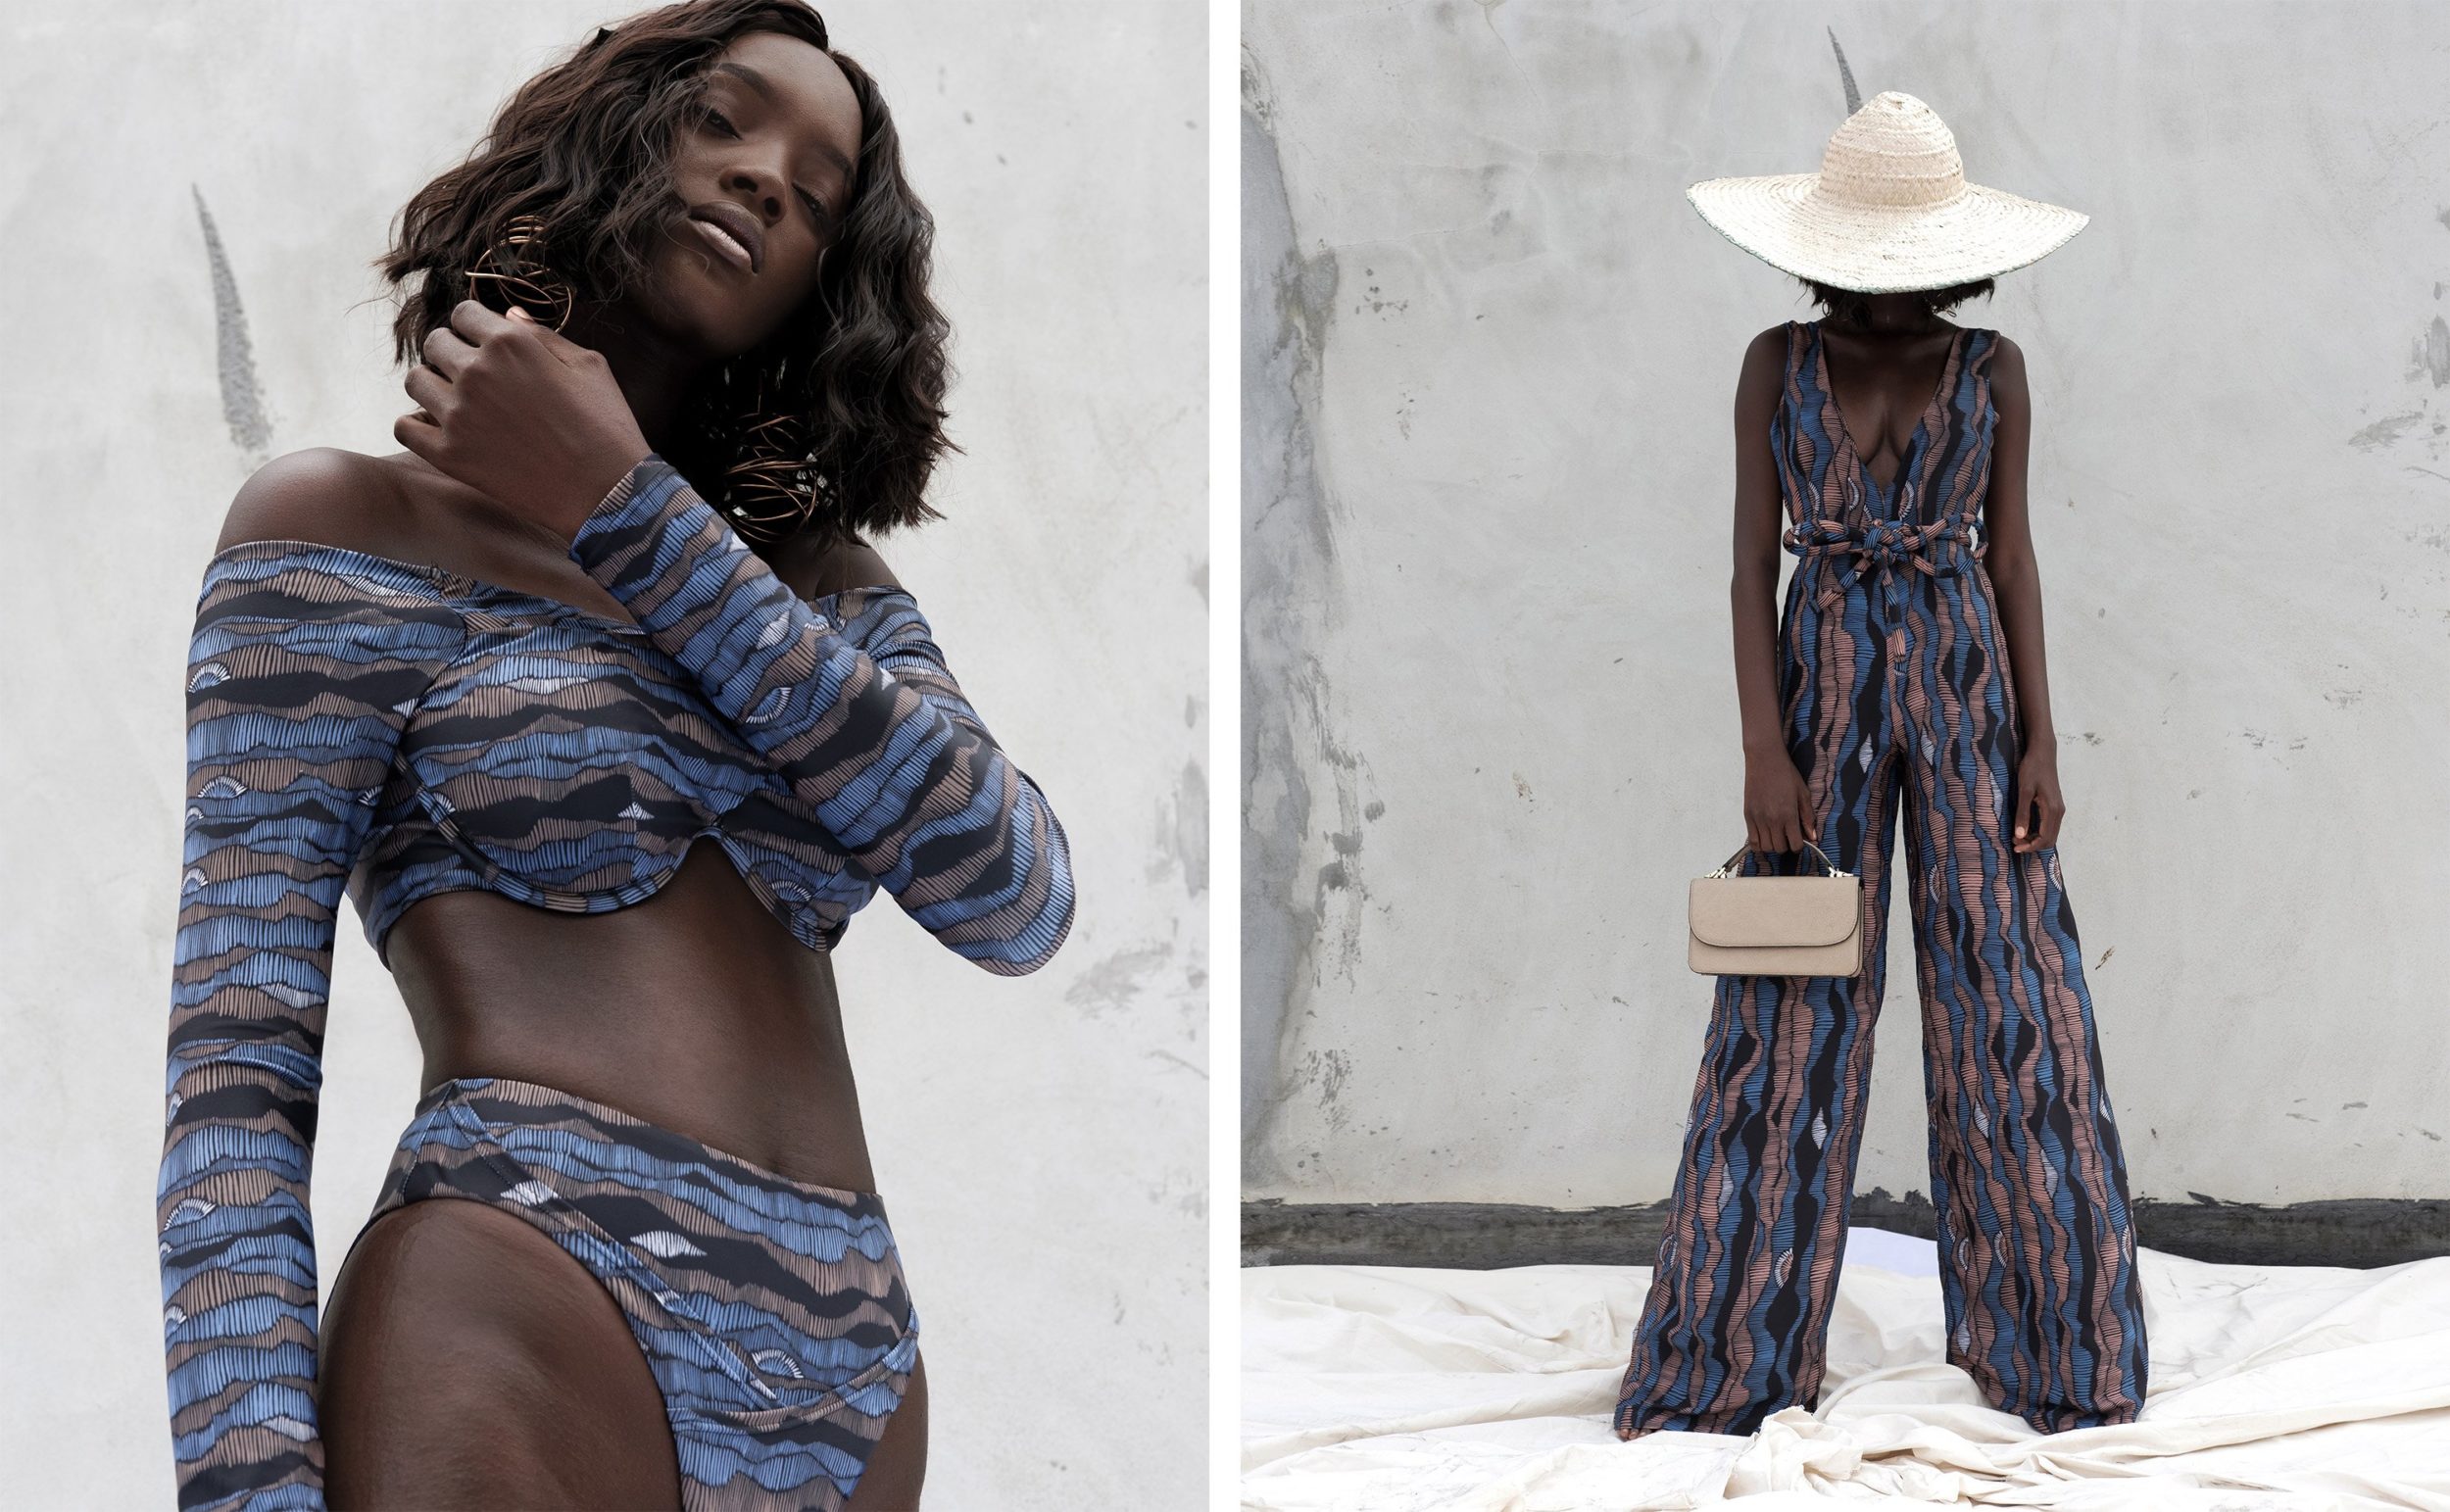 Hands Down! Andrea Iyamah Released The Best Spring/Summer Swimwear For Every Style